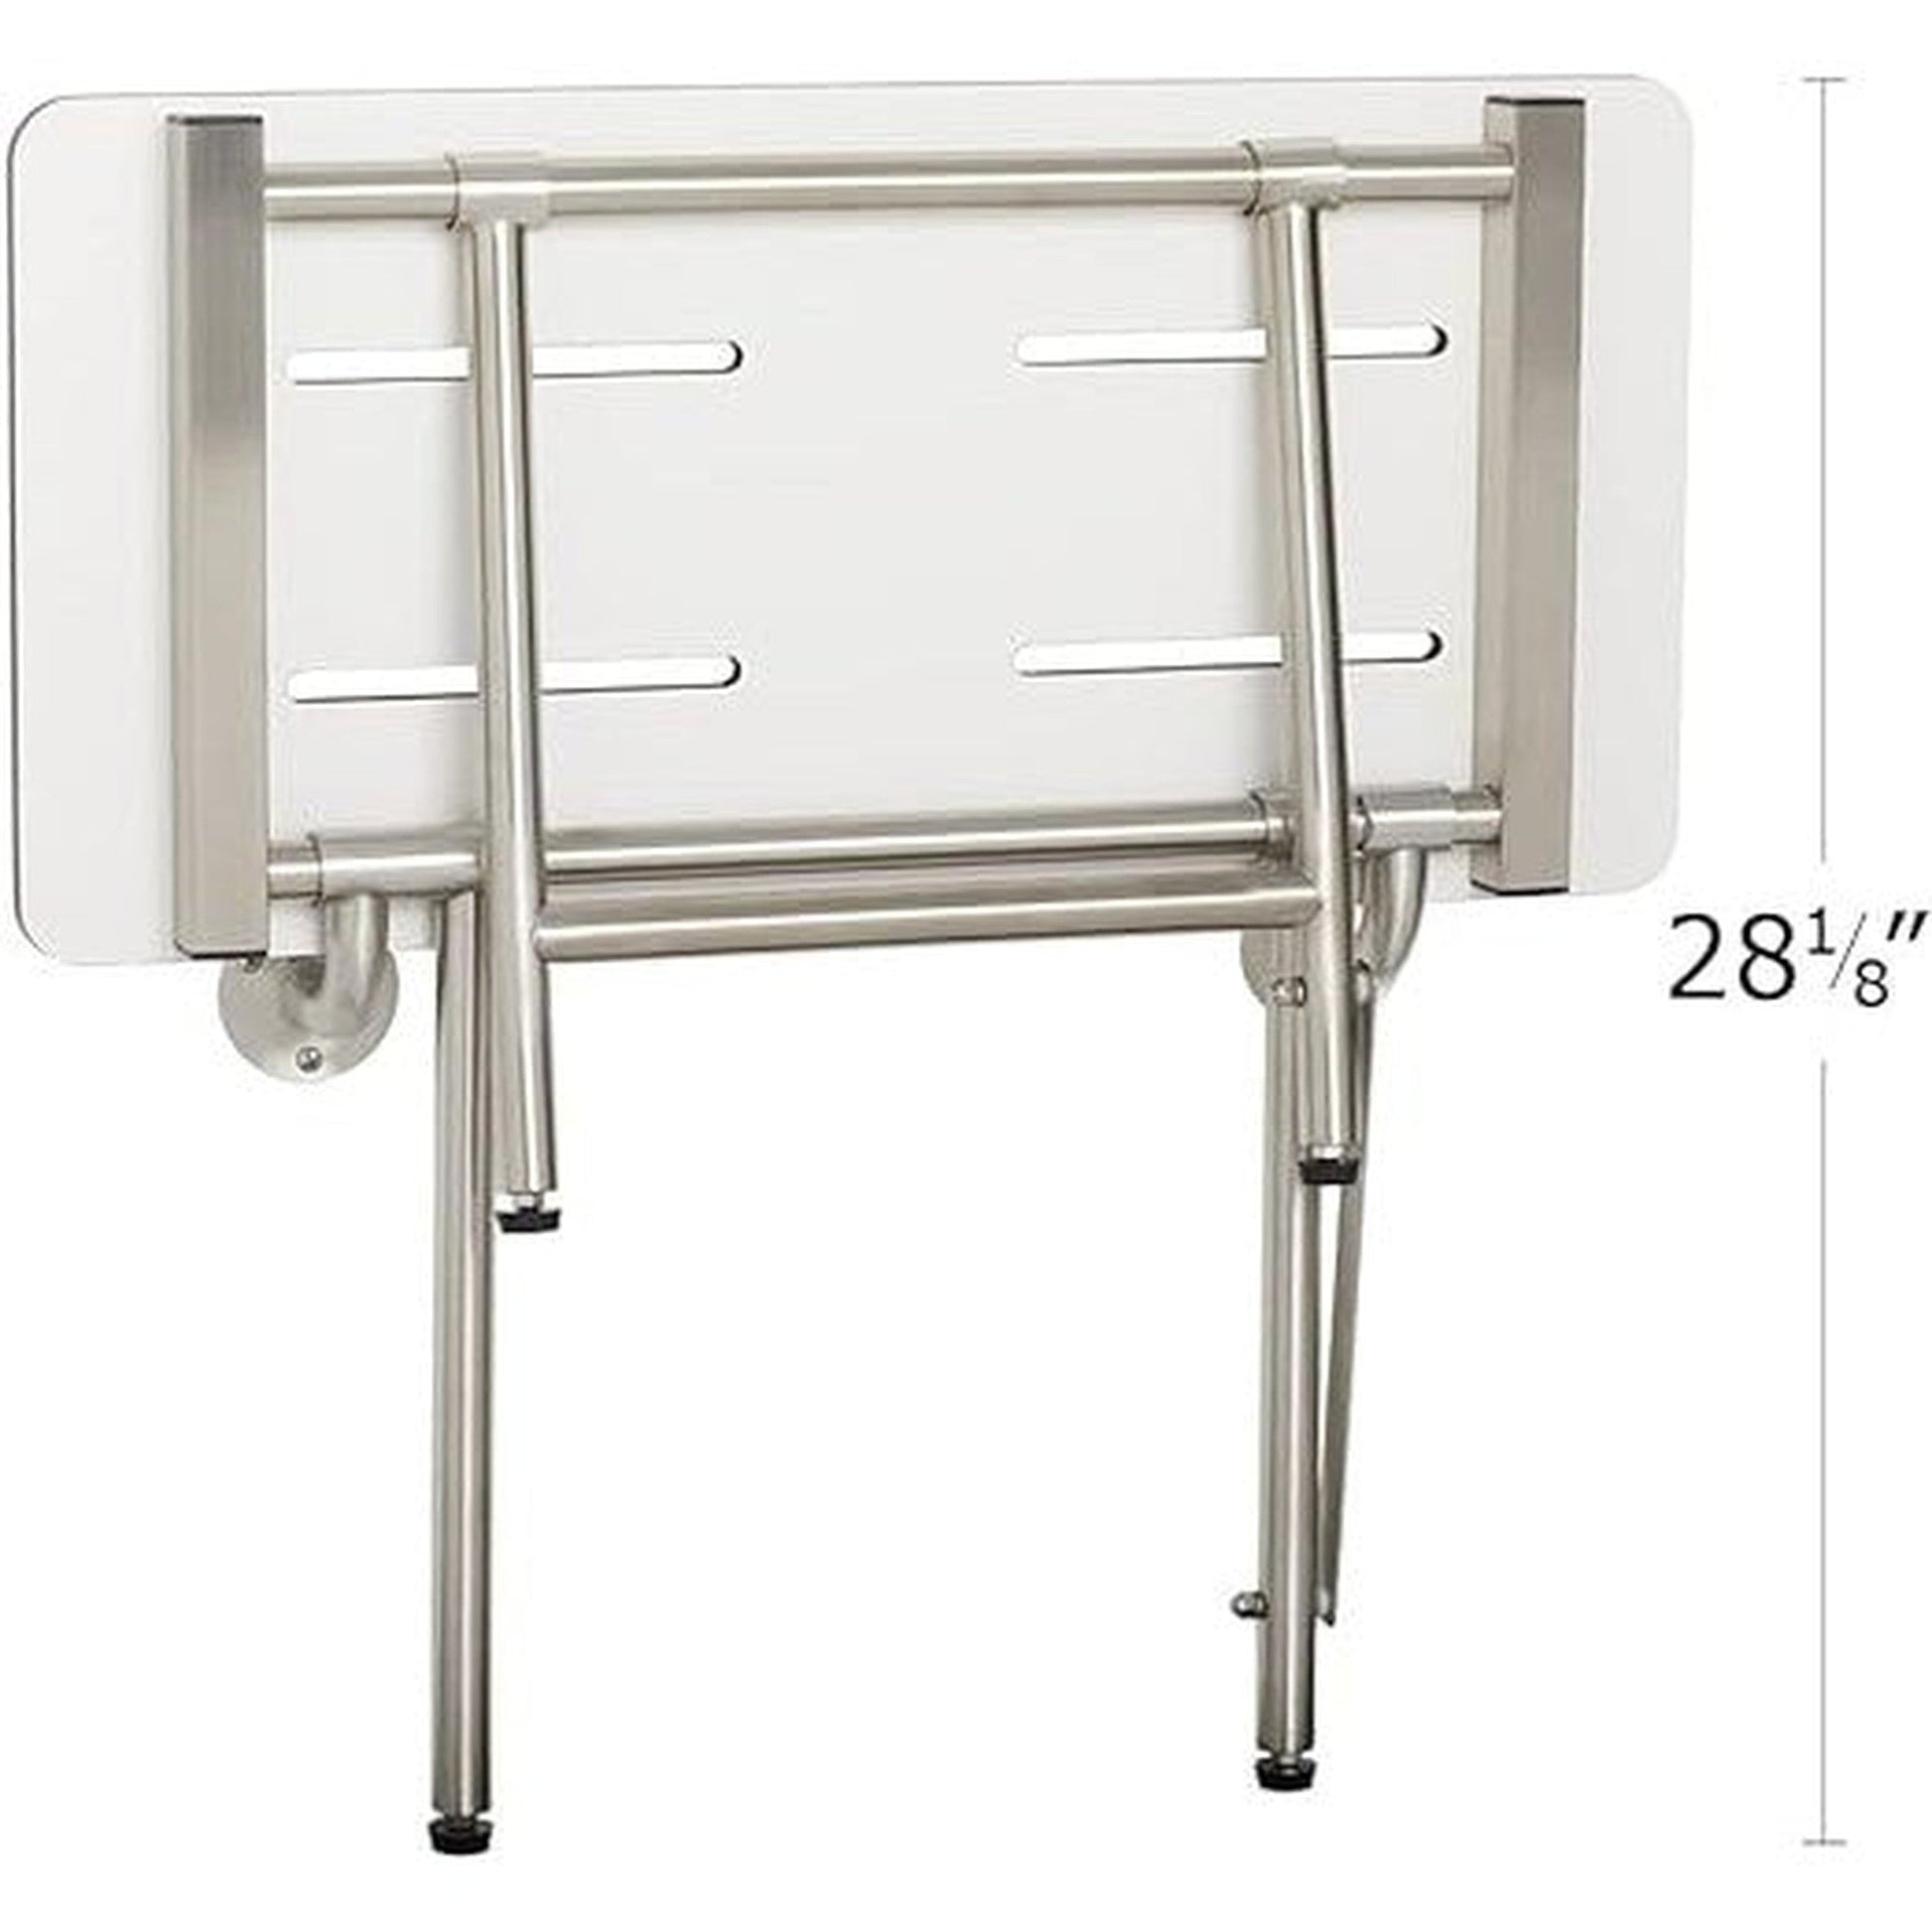 Seachrome Signature Series 24" W x 15" D White One-Piece Solid Phenolic Seat Top Bench Shower Seat With Swing-Down Legs